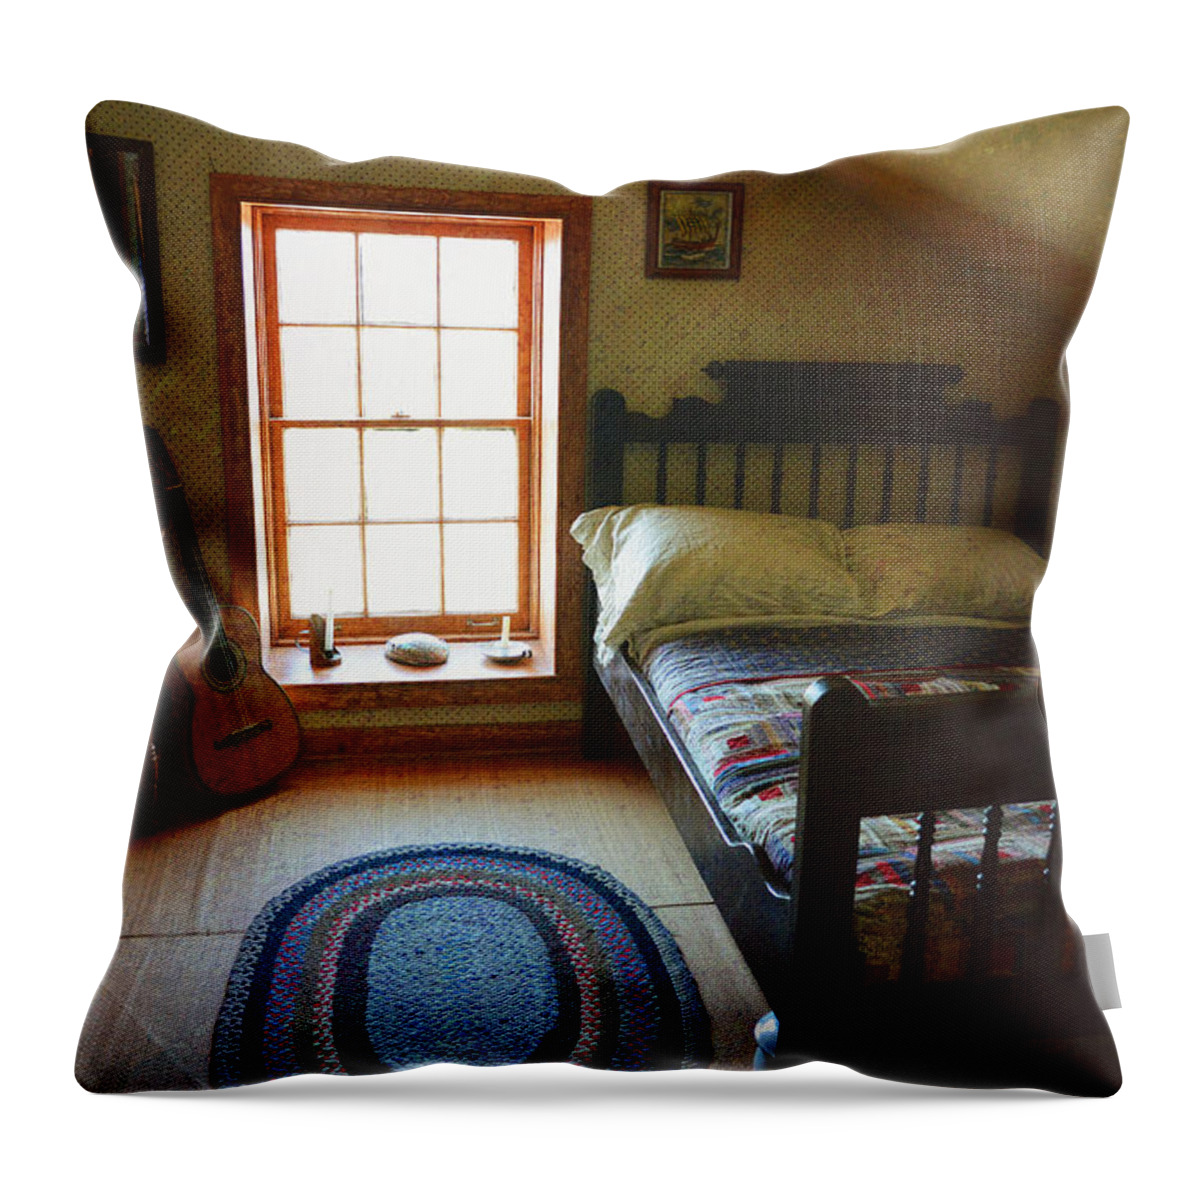 The Lighthouse Keepers Bedroom Throw Pillow featuring the photograph The Lighthouse Keepers Bedroom - San Diego by Glenn McCarthy Art and Photography